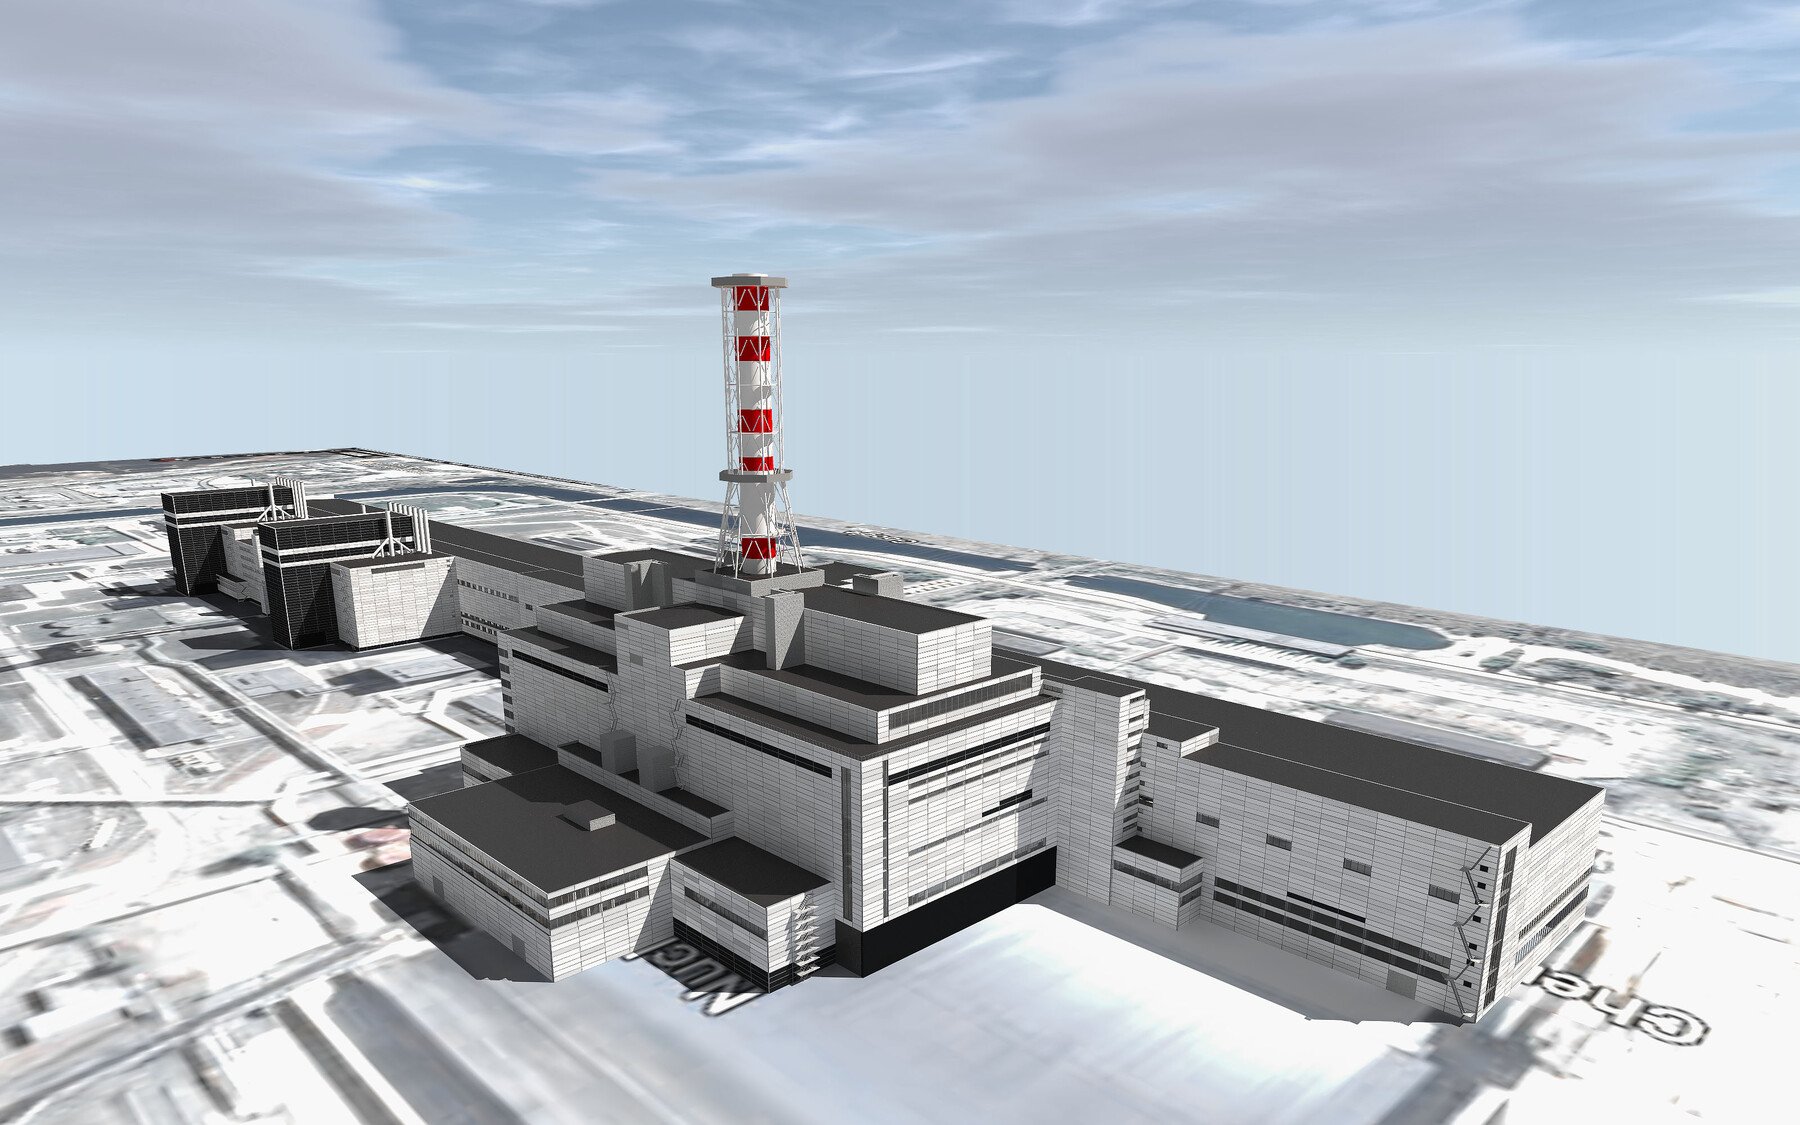 ArtStation - Chernobyl Nuclear Power Plant 3D model | Resources